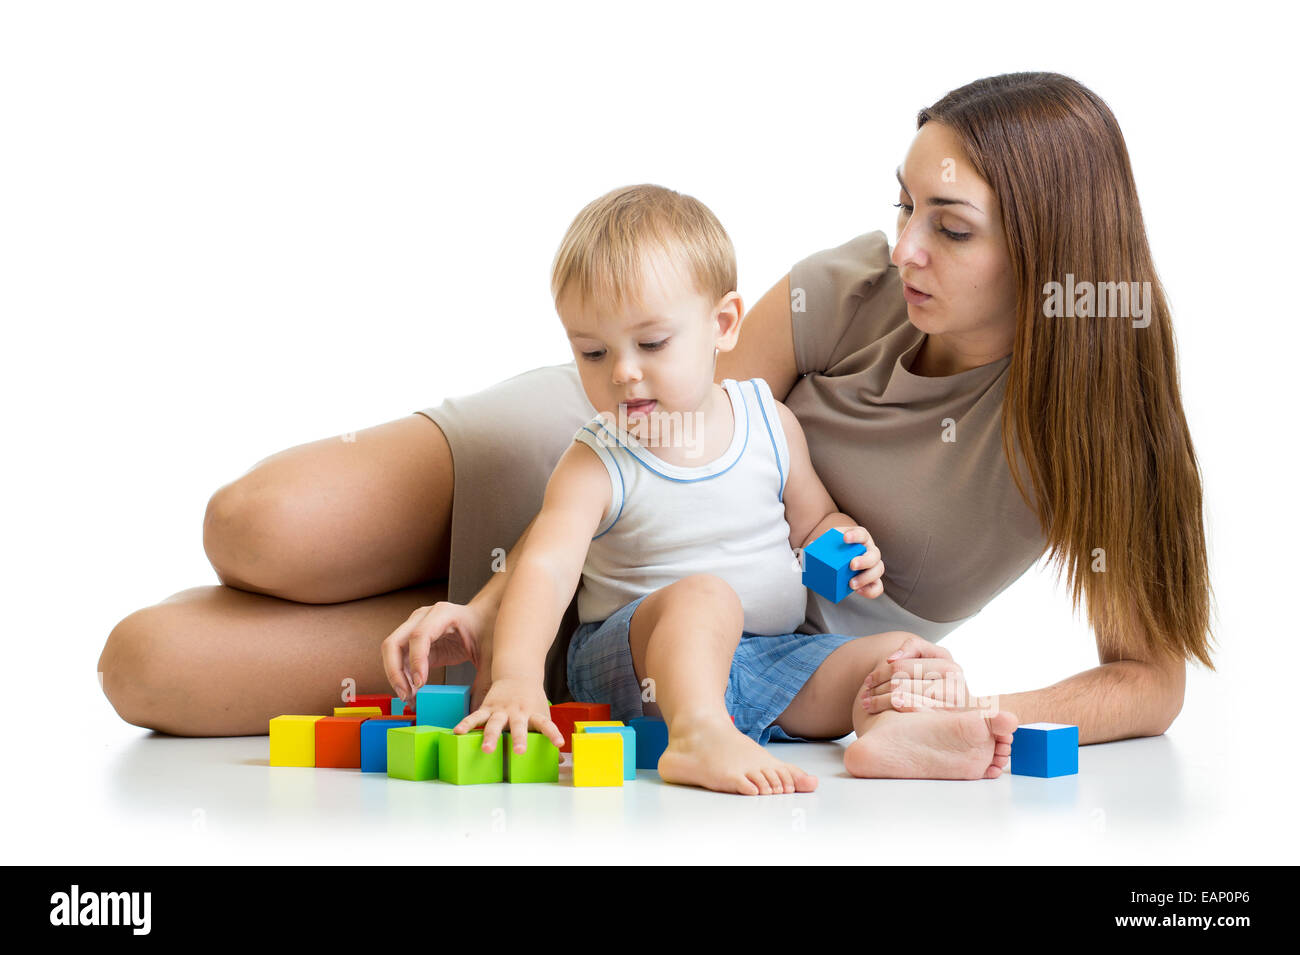 cute mother and child boy play together Stock Photo